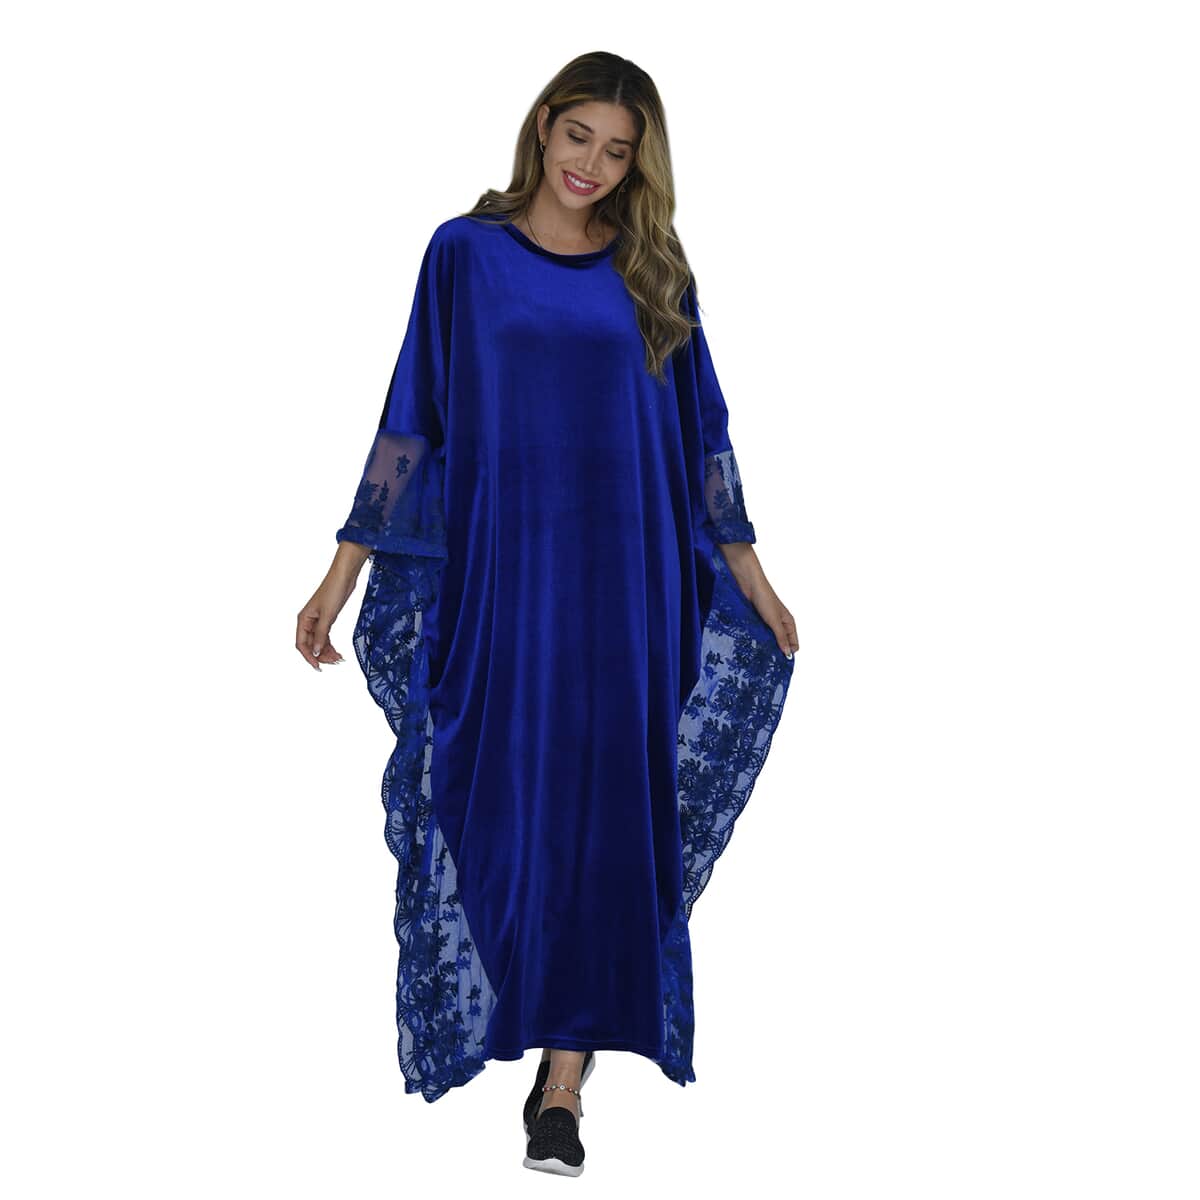 Tamsy Black Label - Lux Stretch Velvet Kaftan with Lace in Royal Blue - One Size Fits Most image number 3